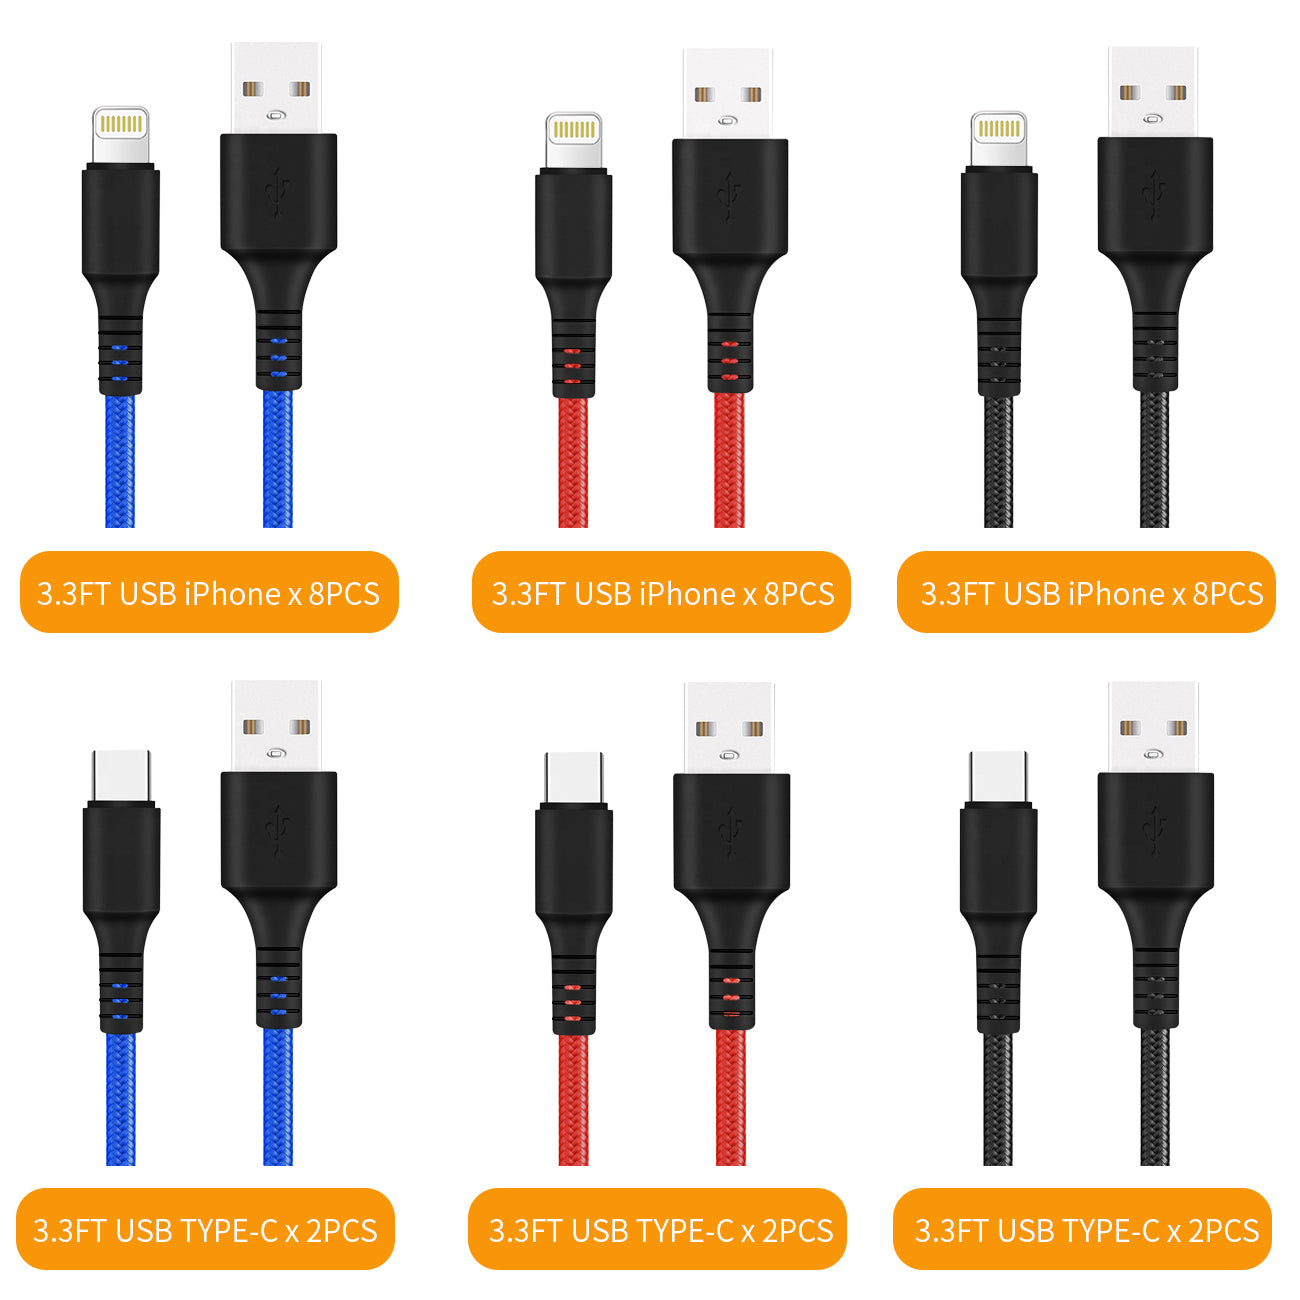 PLASTIC DISPLAY SET(30 pcs of fast charge data cable for iPhone and Type-C)